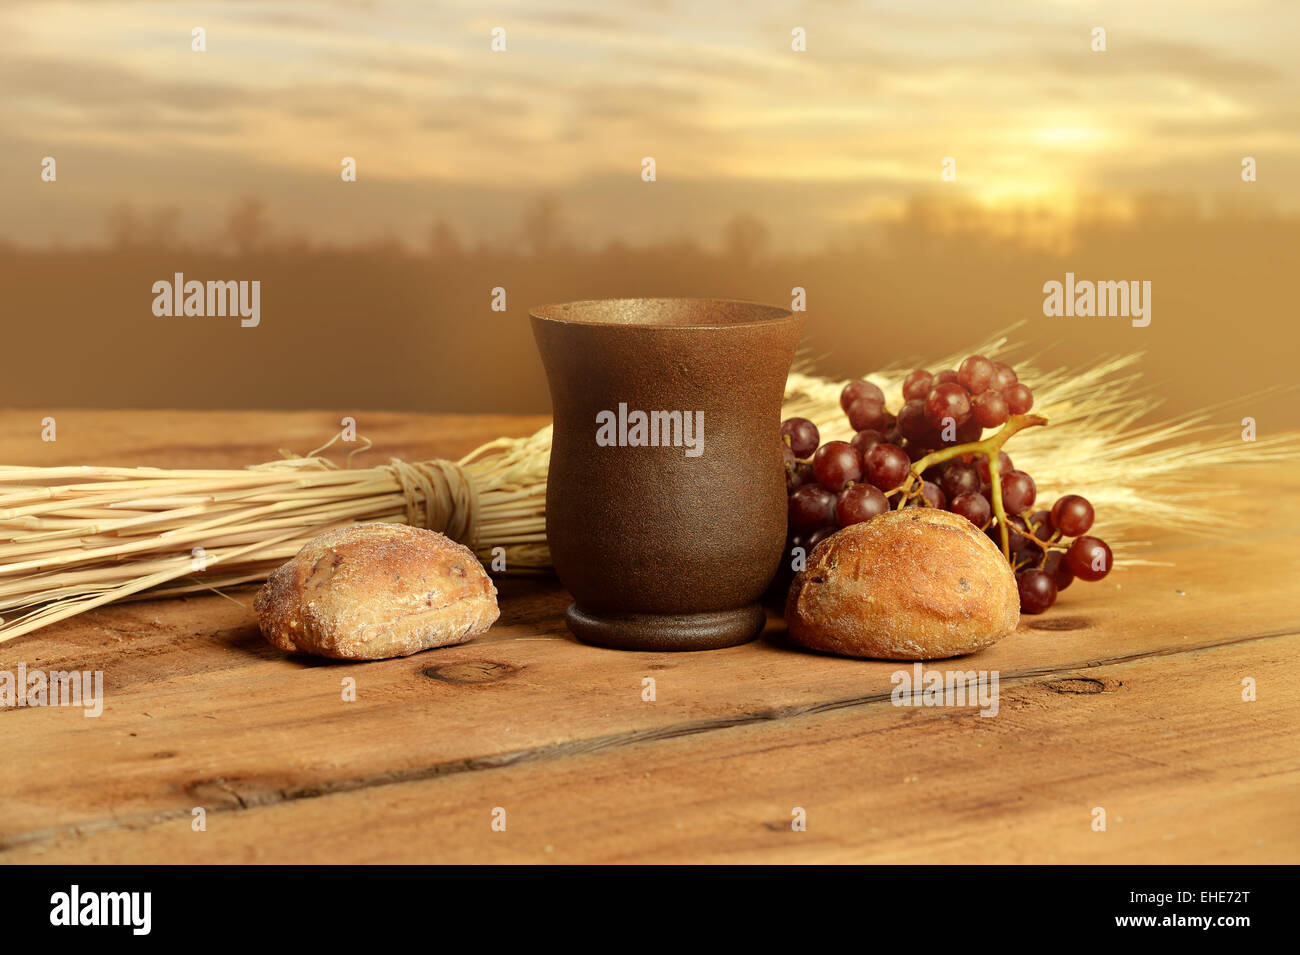 Cup of wine, bread. grapes and wheat on vintage table with warm sunset in background Stock Photo